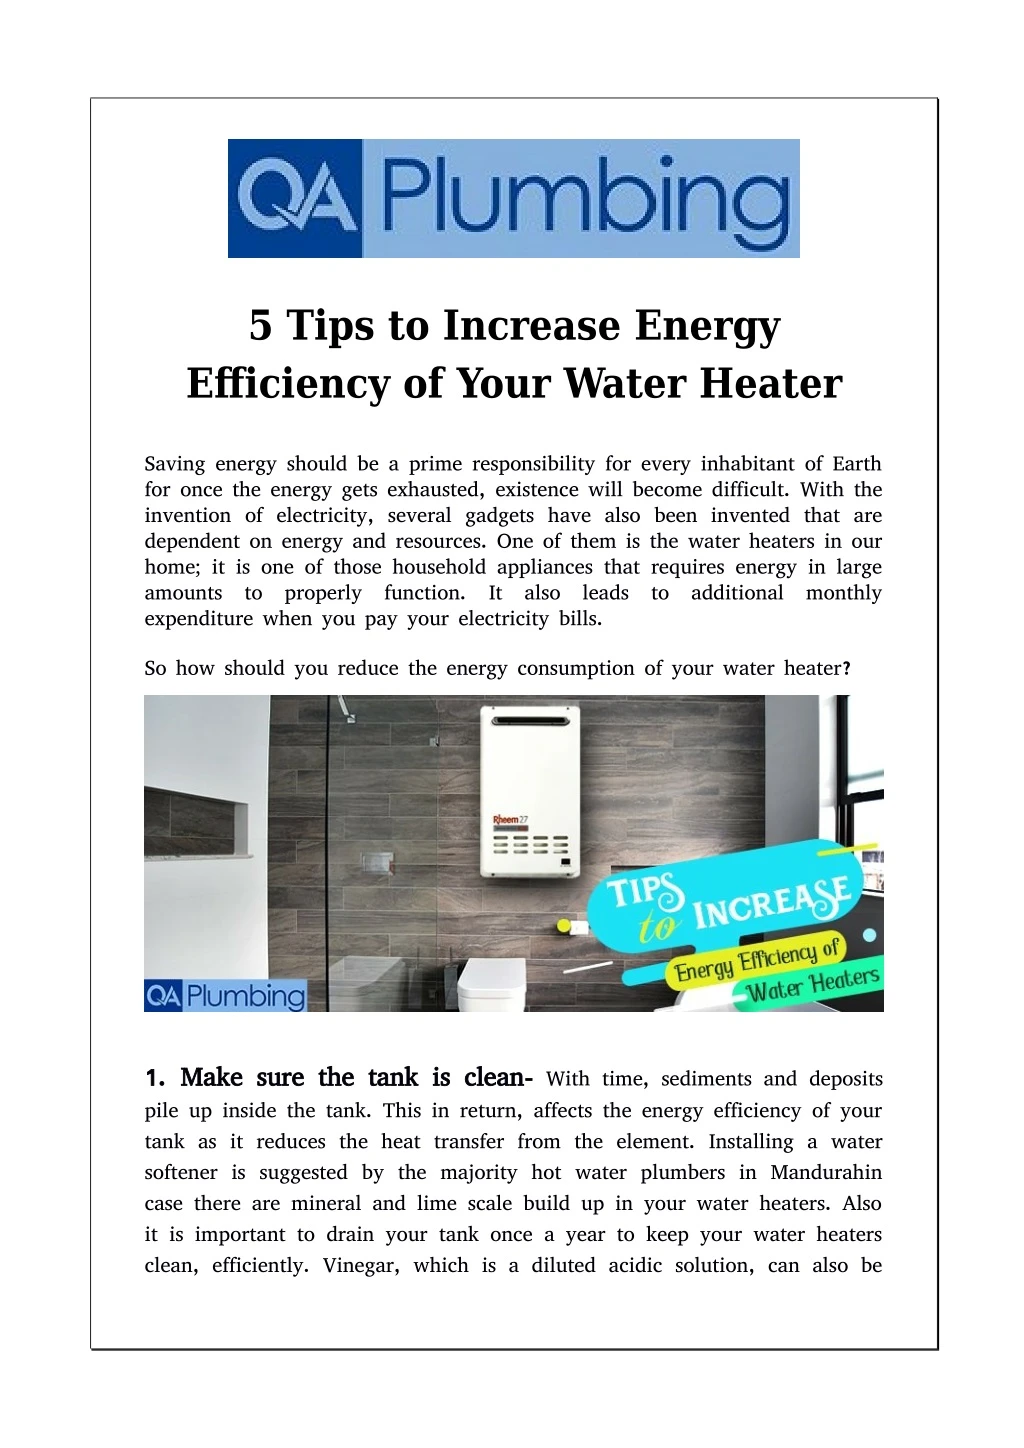 5 tips to increase energy efficiency of your